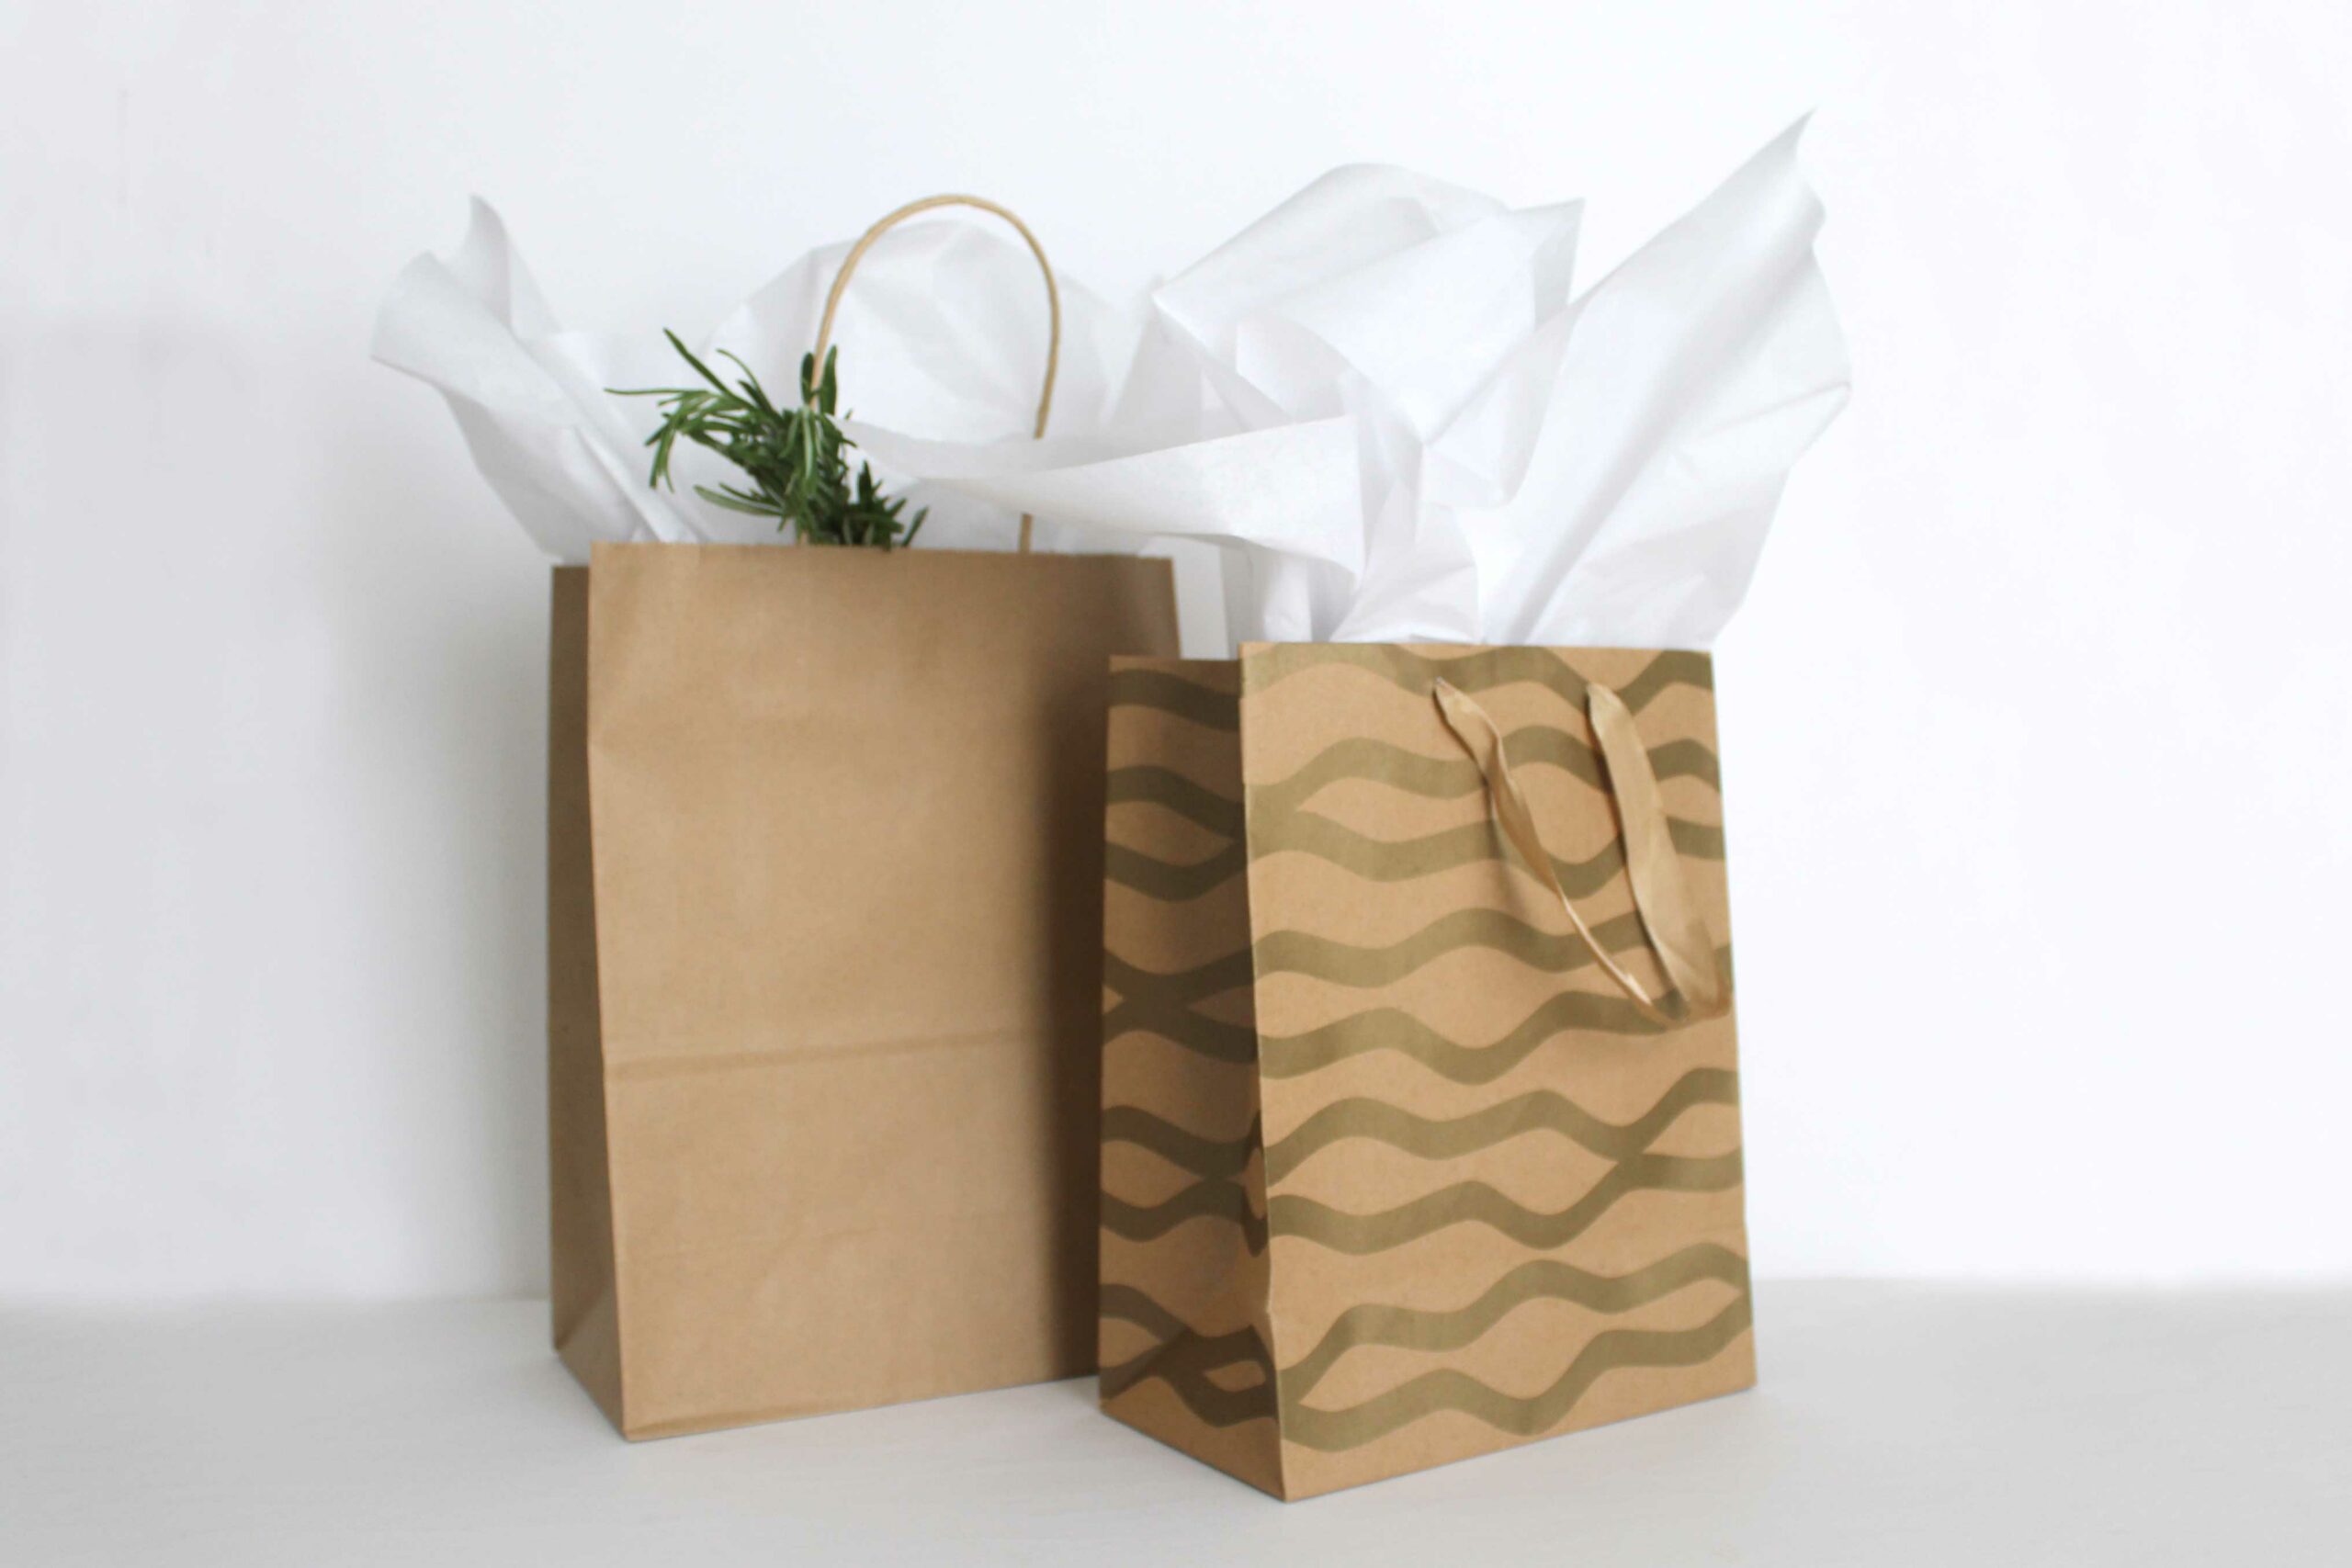 2019 Sustainable Gift Guide